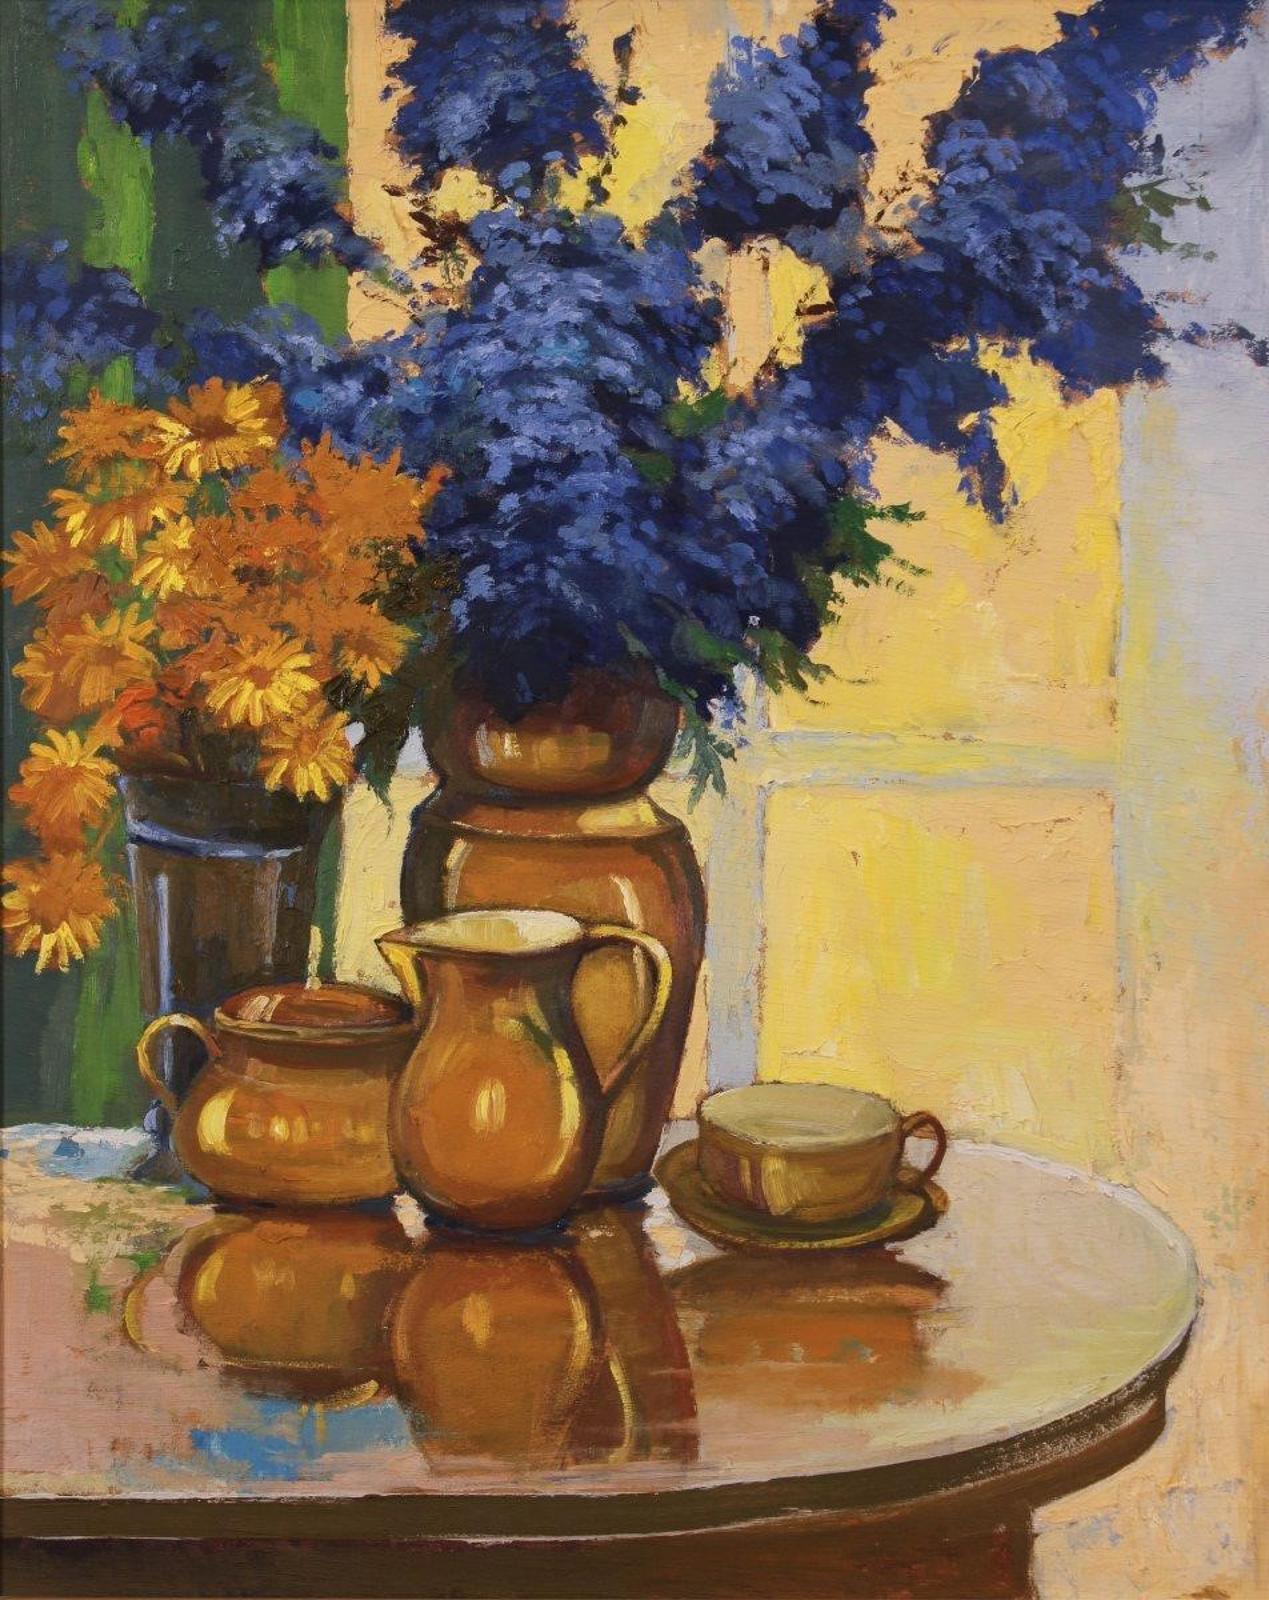 John L. Byrne (1906-1976) - Untitled, Still Life with Blue and Yellow Flowers